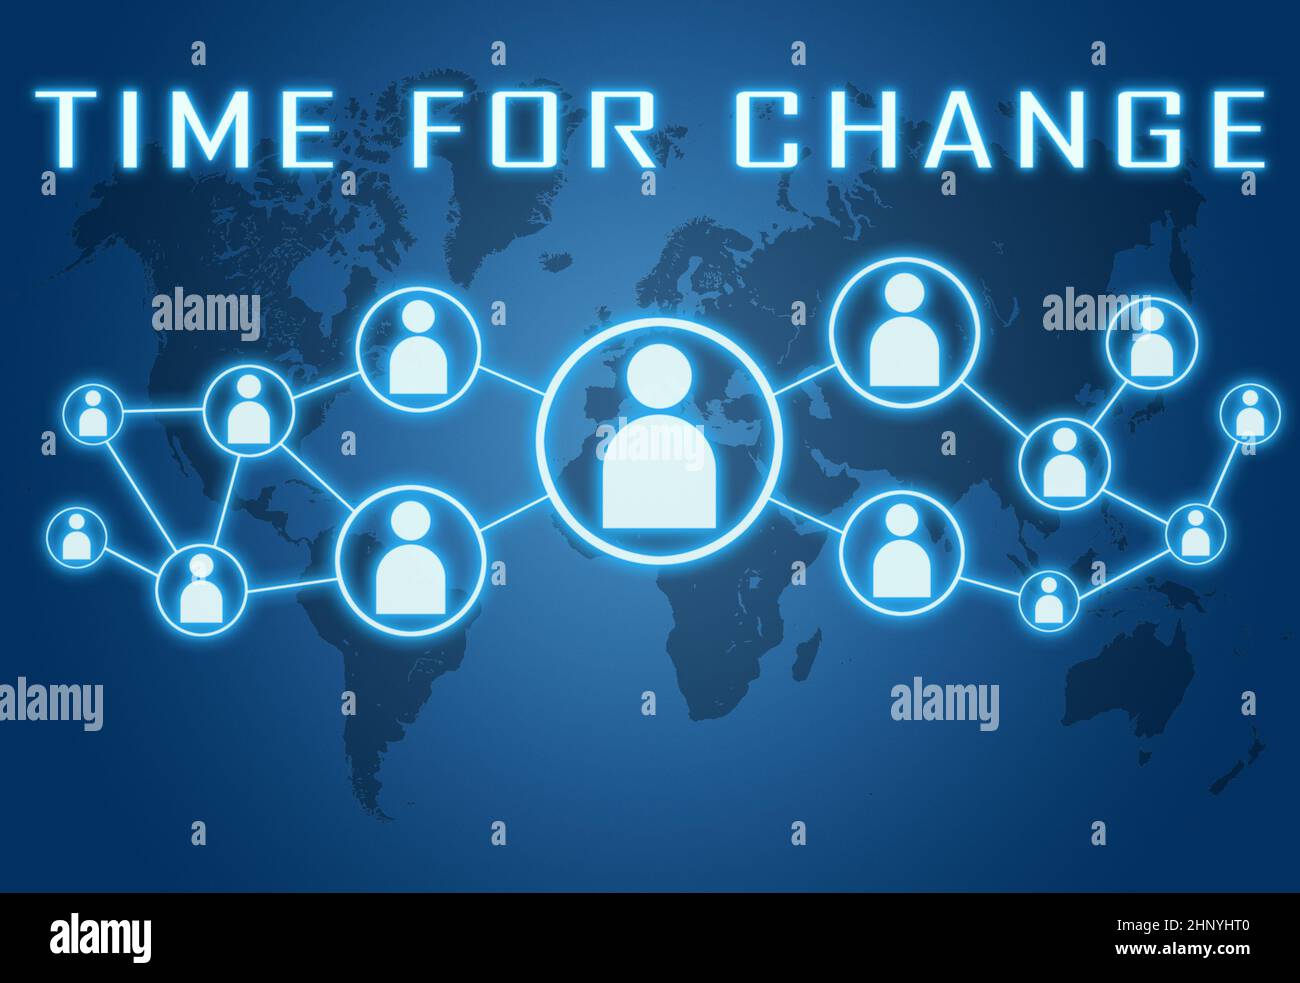 Time for Change - text concept on blue background with world map and social icons. Stock Photo